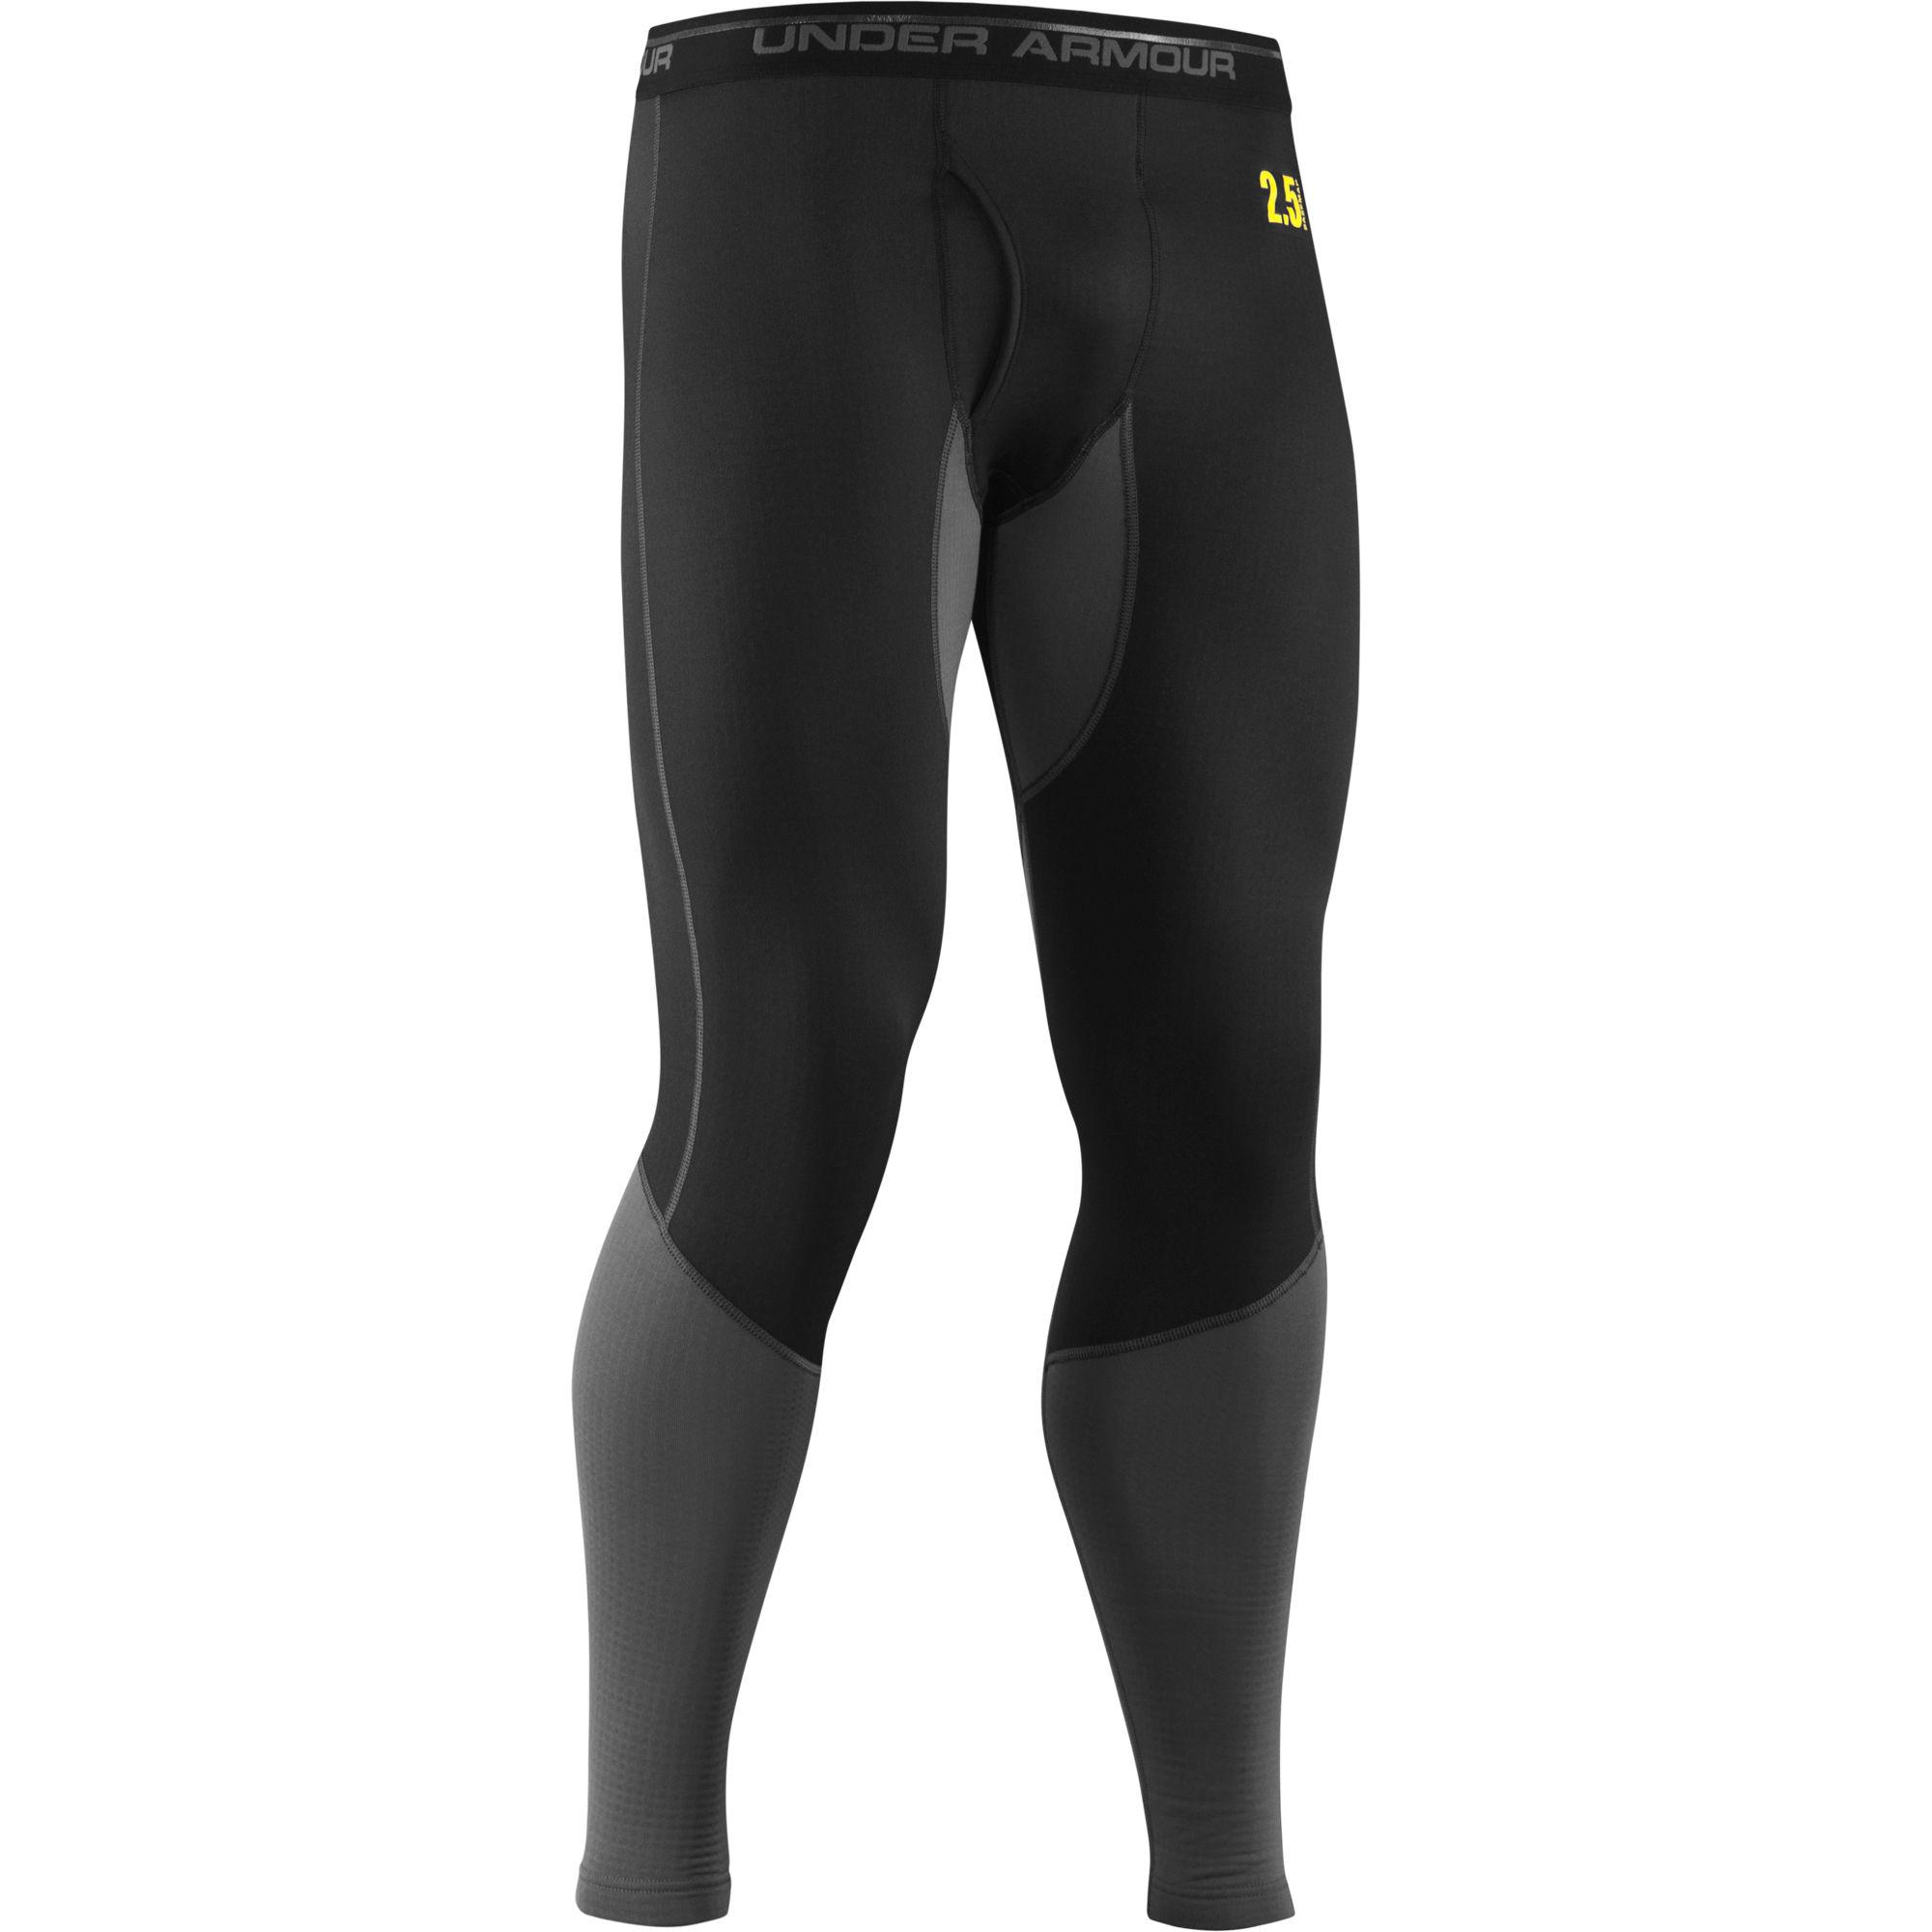 Foto Mallas largas Under Armour - Base Map 2.5 - Extra Large Black